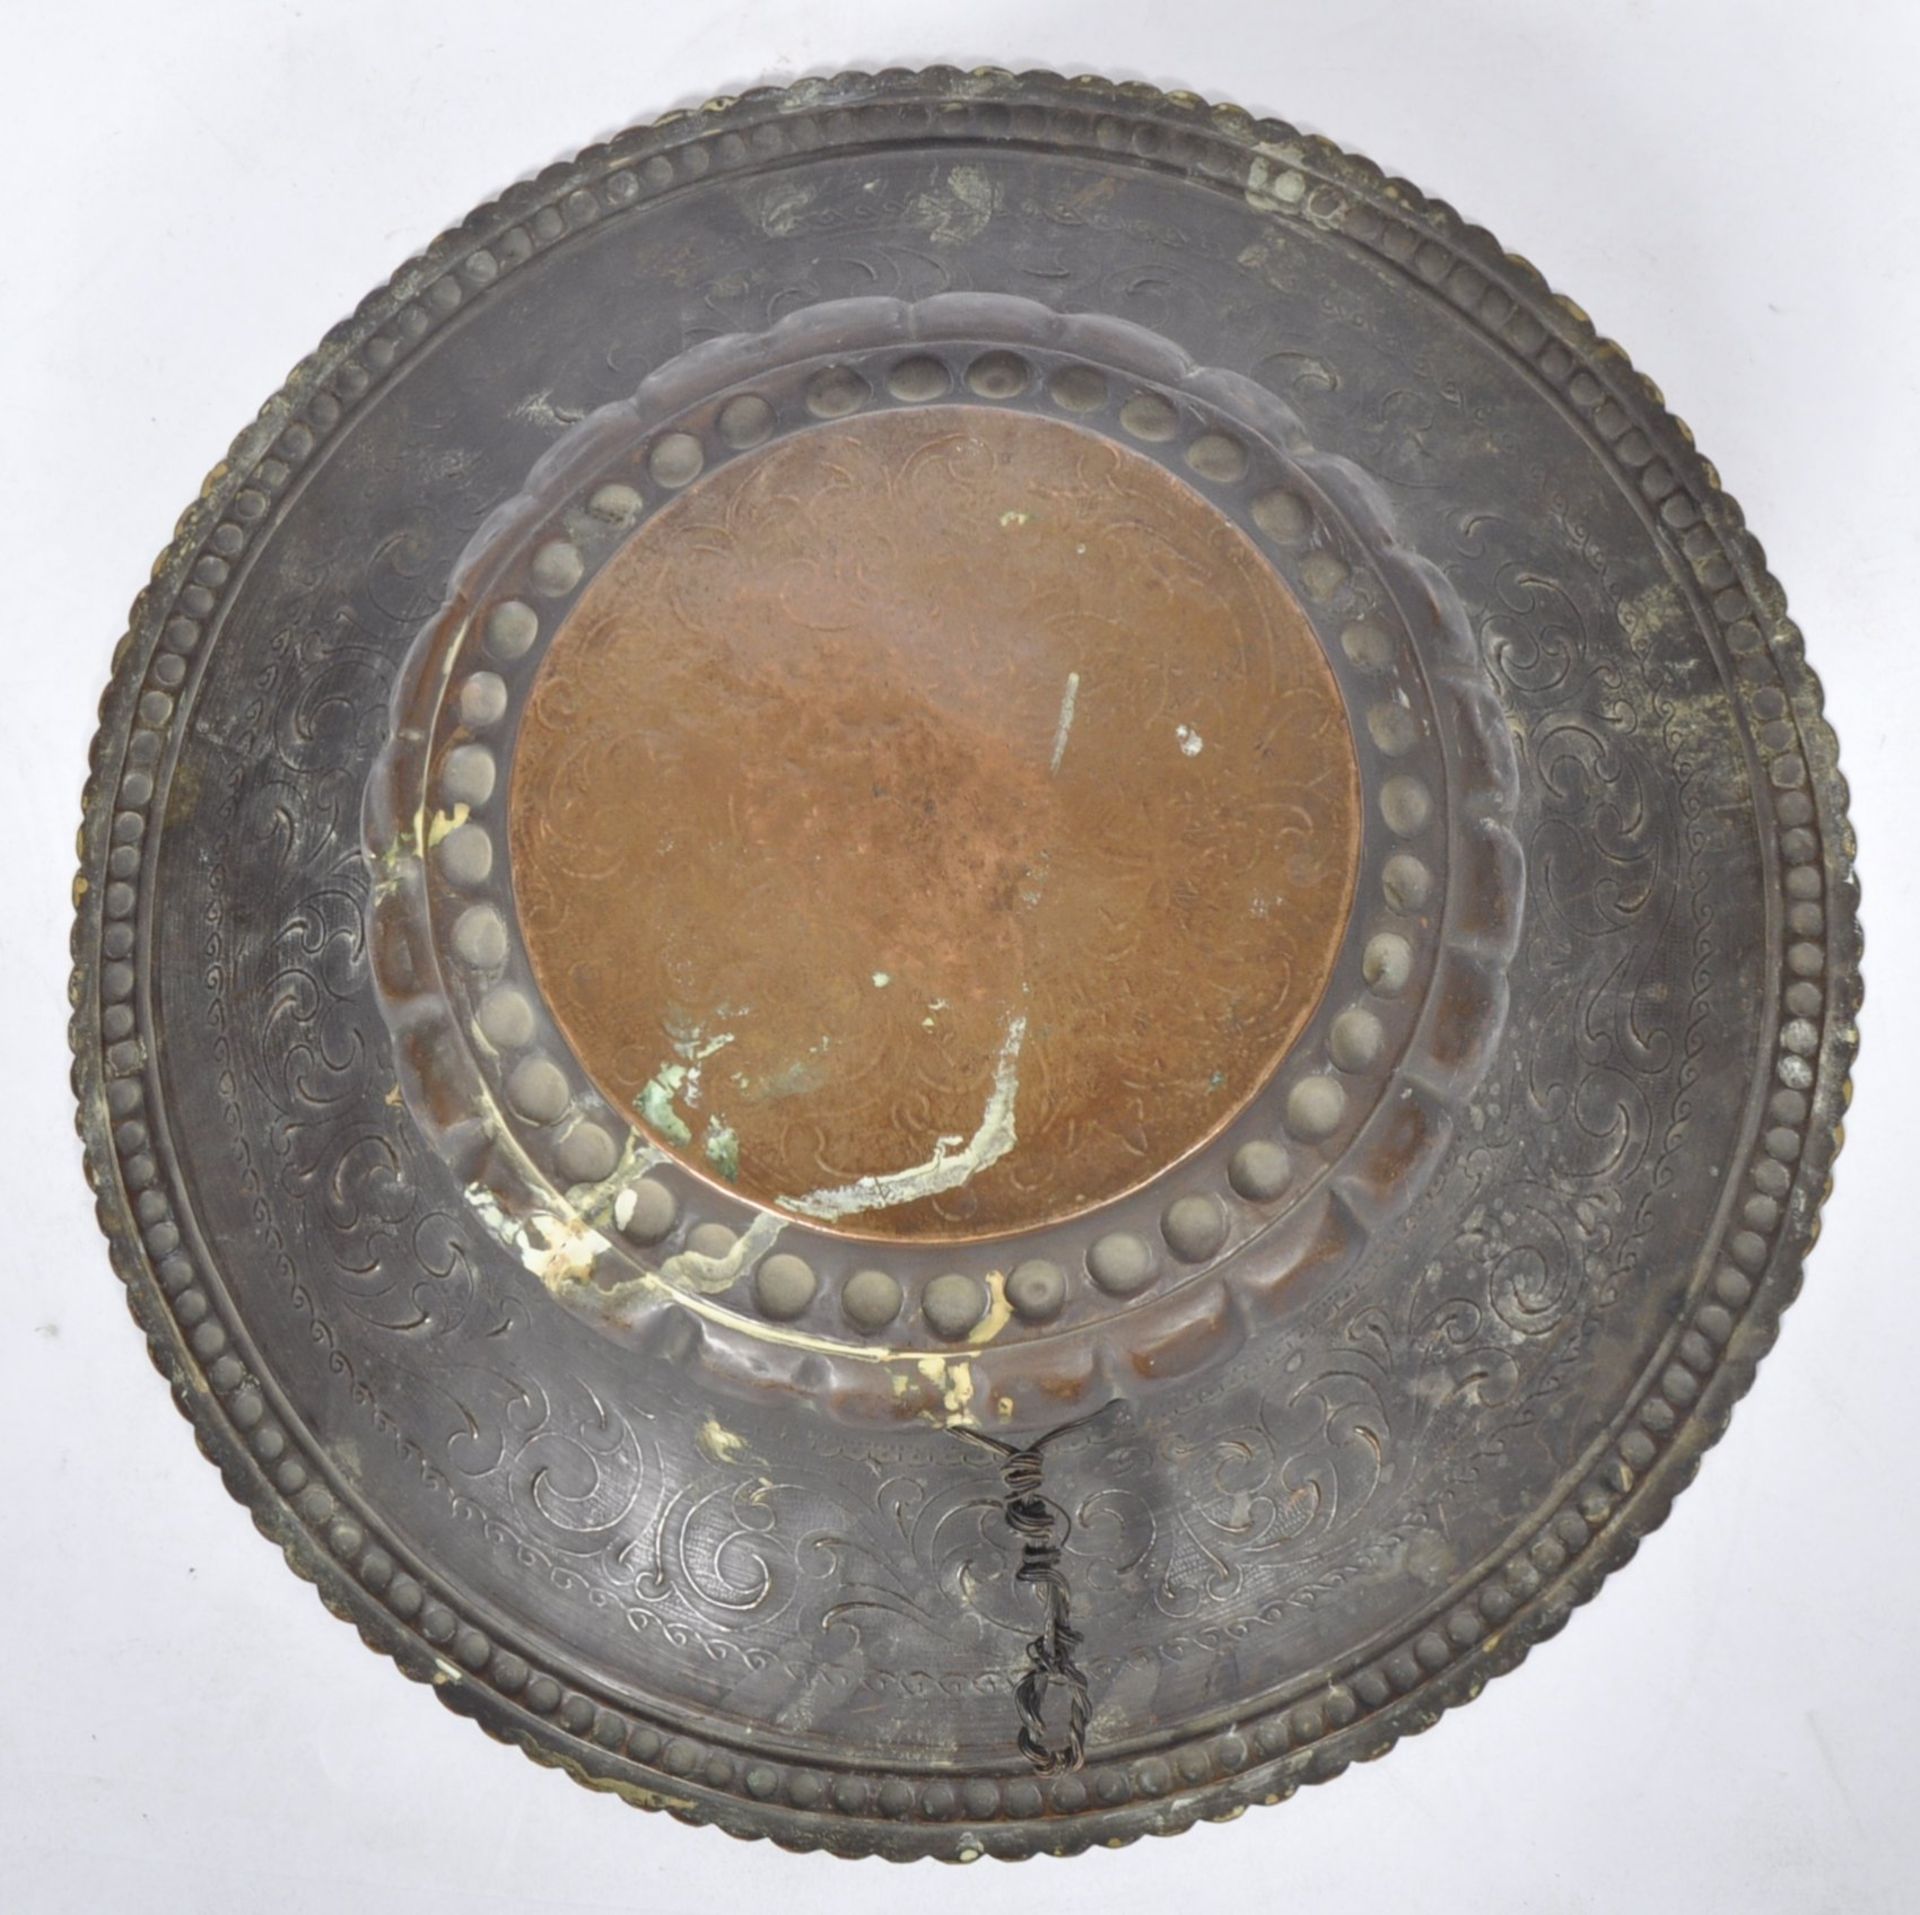 LARGE 19TH CENTURY DUTCH COPPER OFFERINGS BOWL - Image 6 of 6